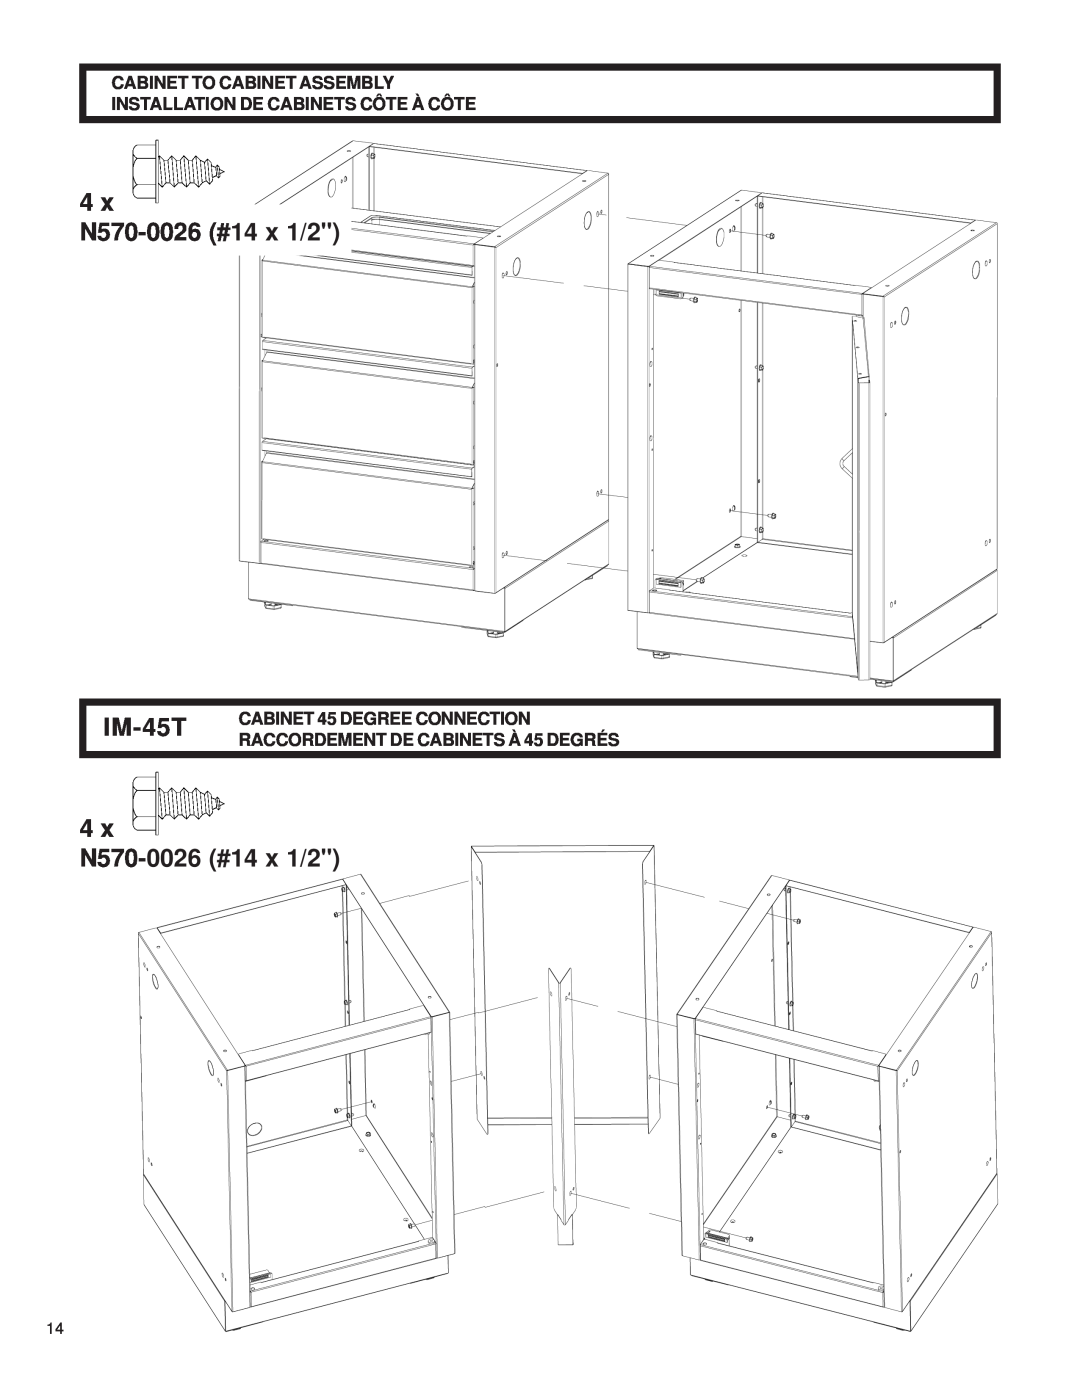 Napoleon Grills 3068-OS IM-45T, Cabinet To Cabinet Assembly Installation De Cabinets Côte À Côte, x N570-0026 #14 x 1/2 